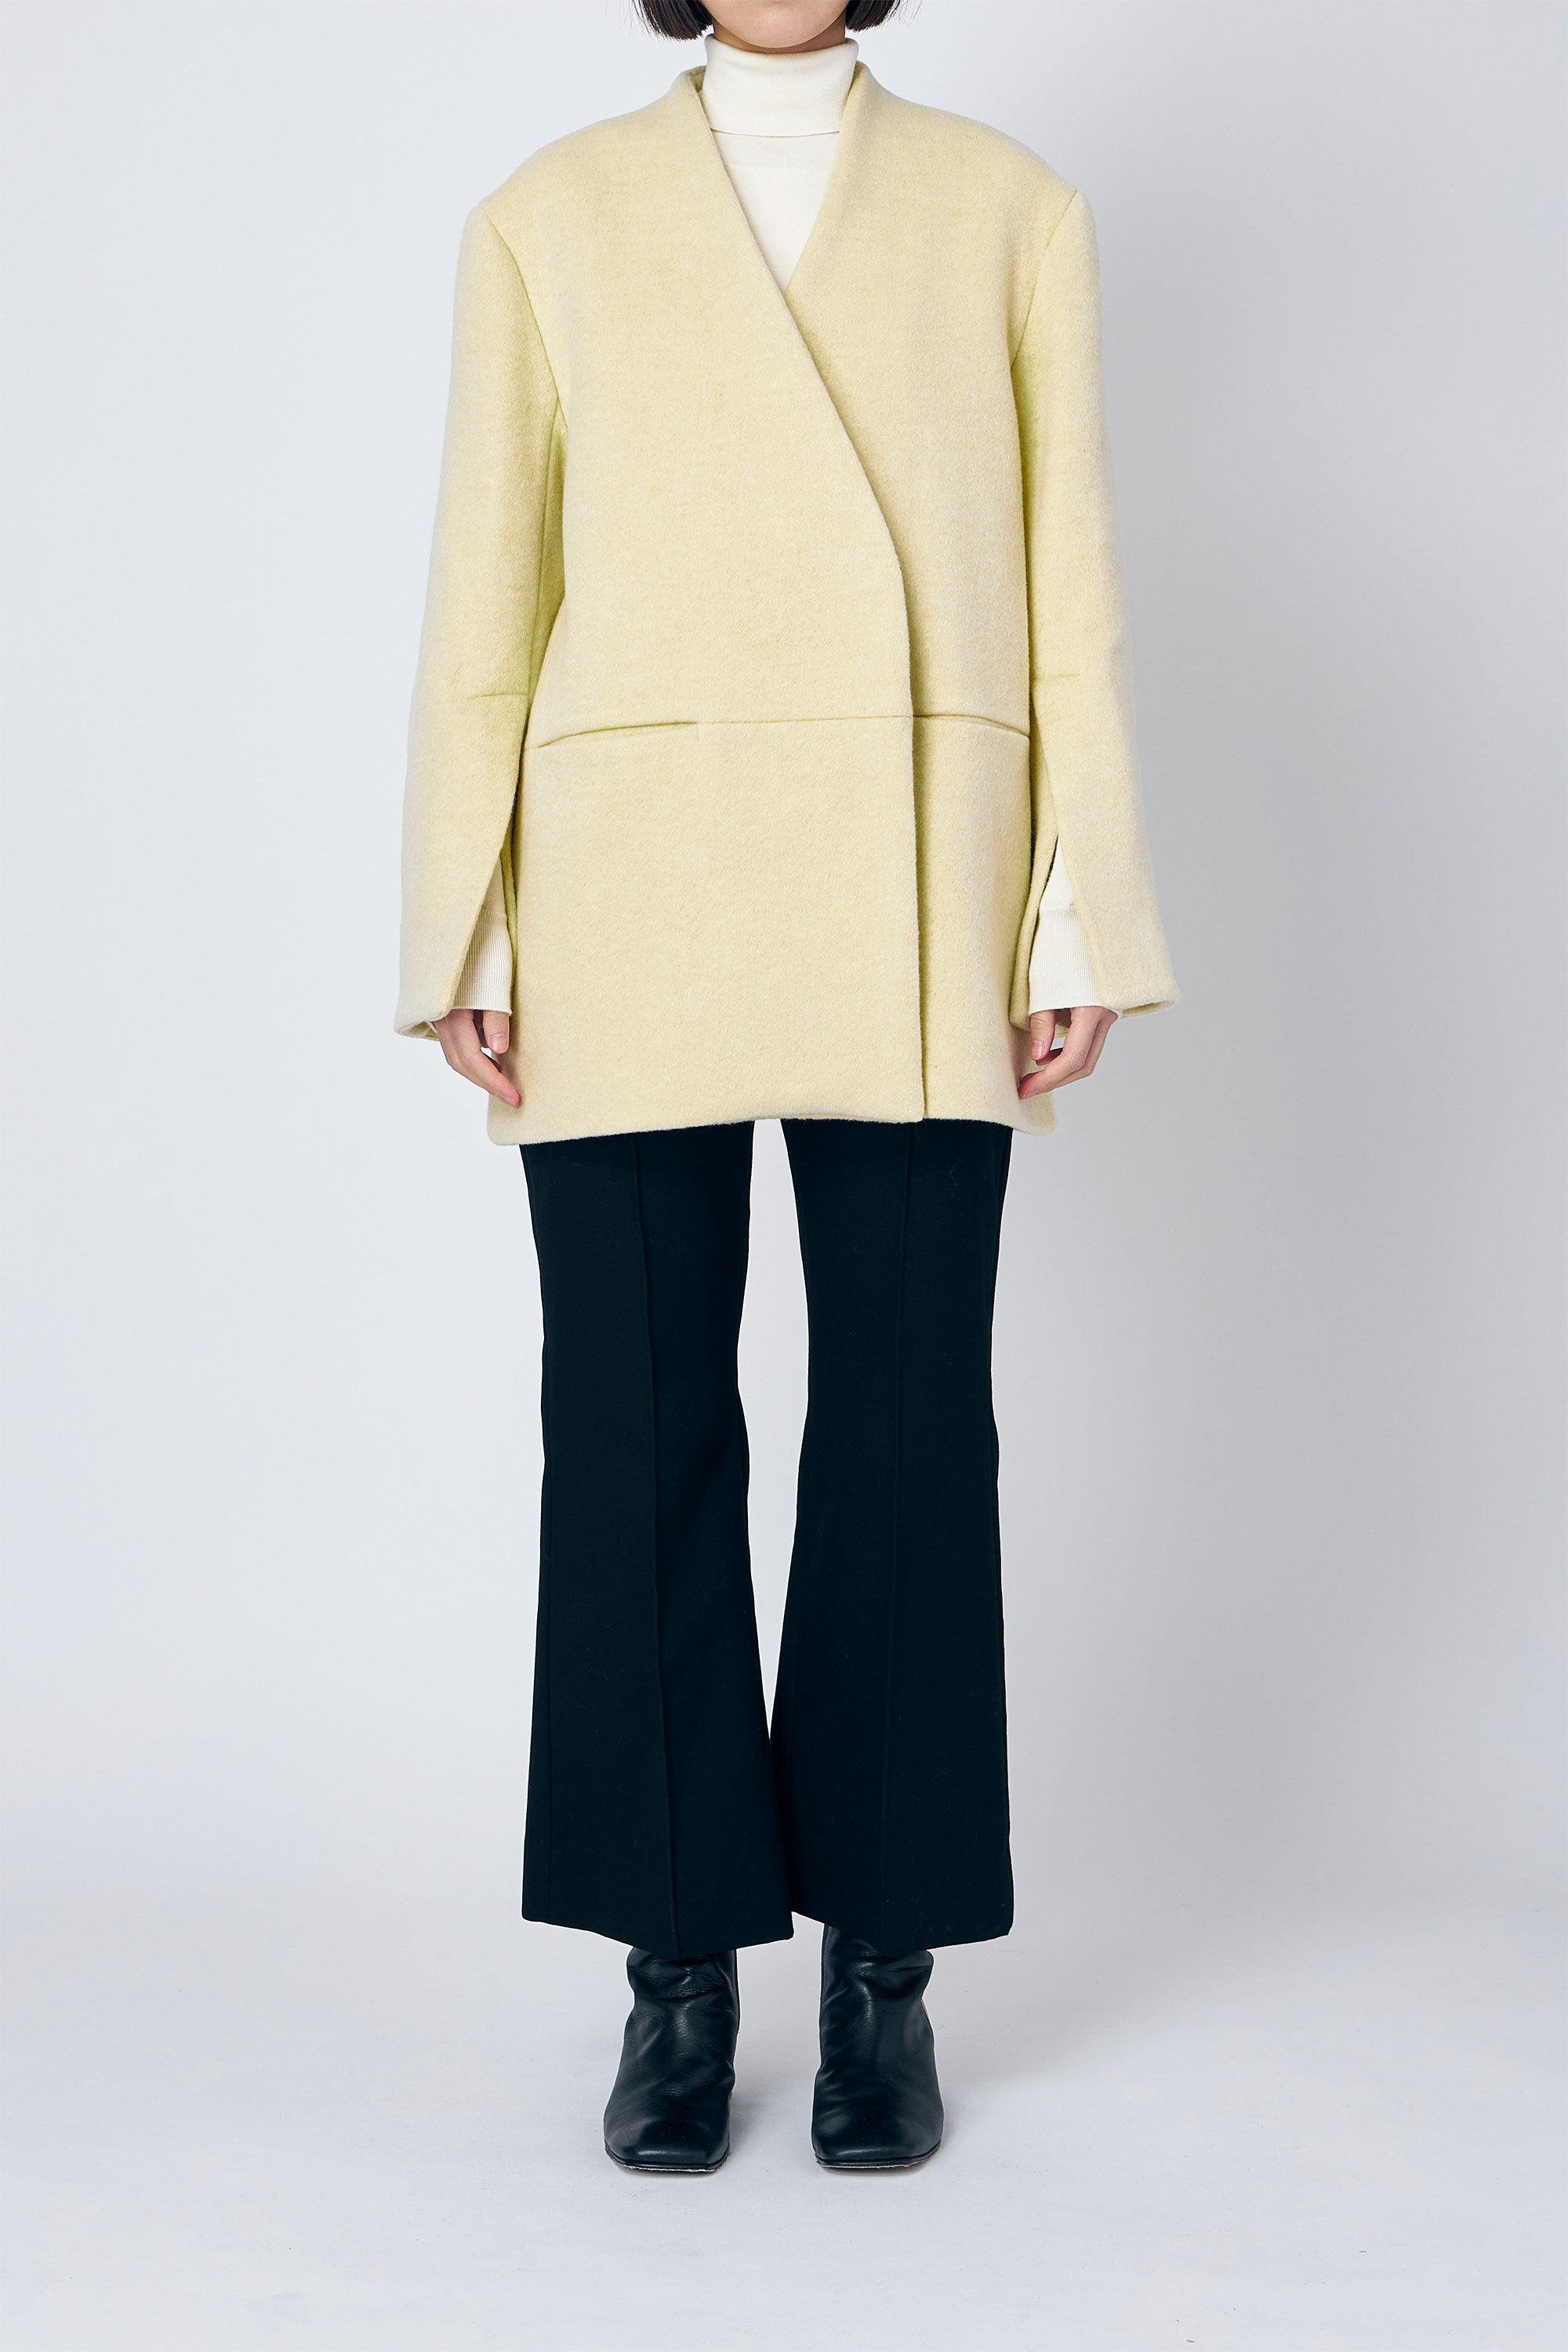 STAND FALL COLLAR COAT – ATELIERMO